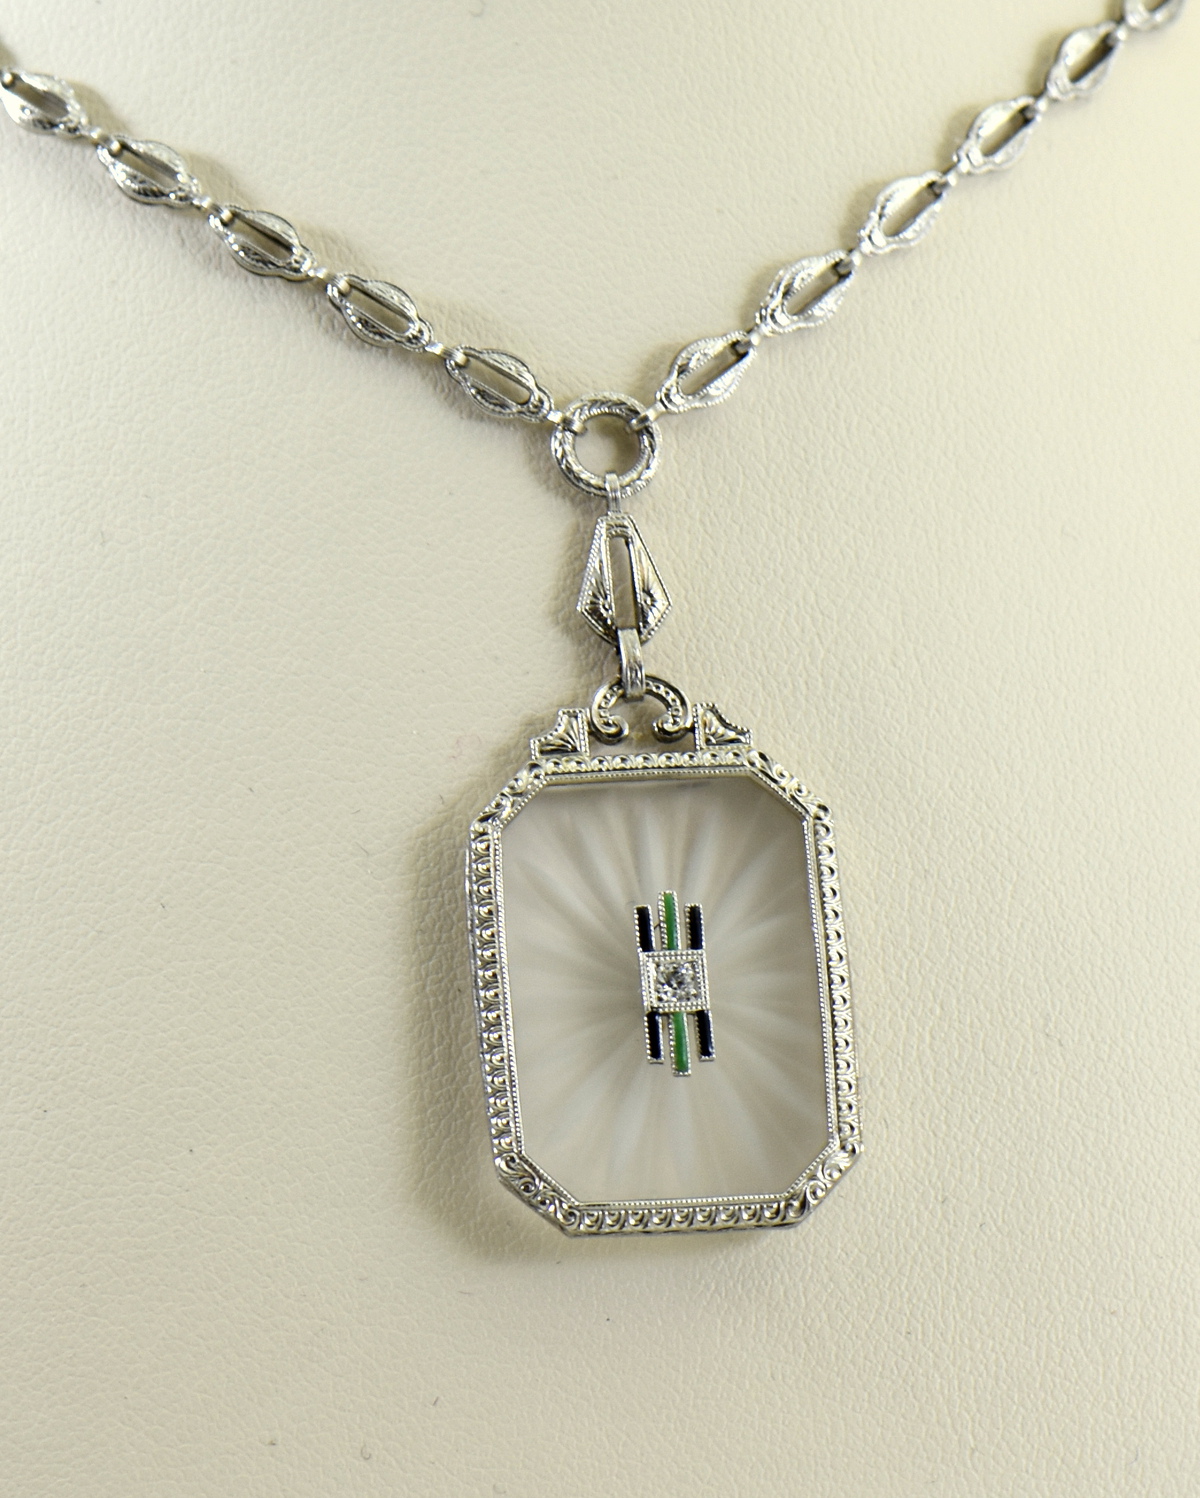 Vintage Art Deco Necklace - Branford Antiques & Home Design | Antiques,  Collectibles and Fine Jewelry